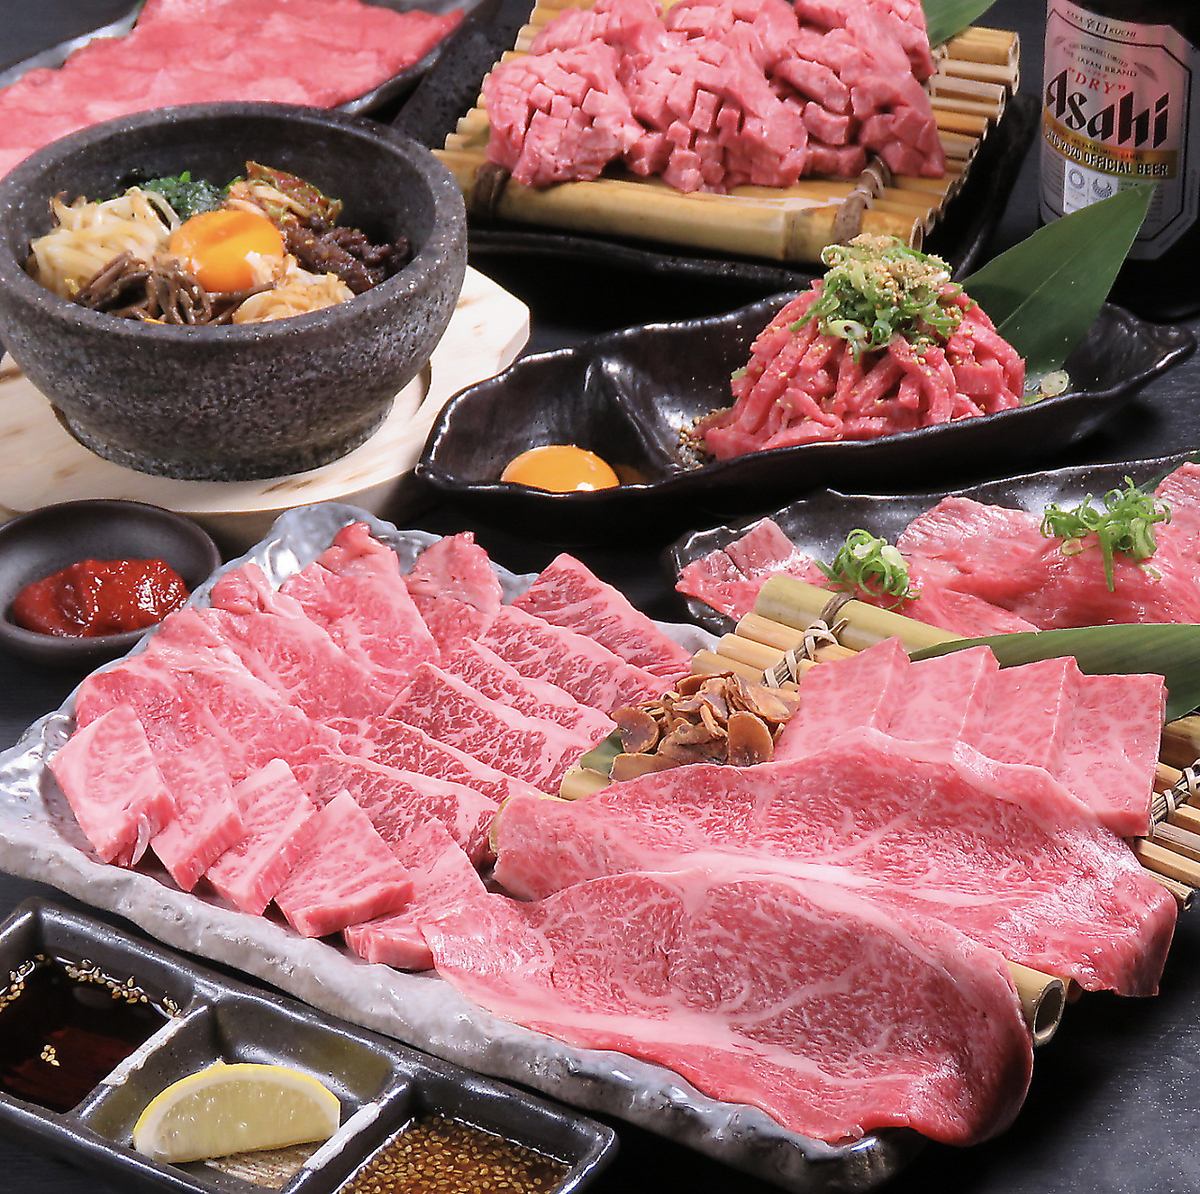 You can enjoy delicious yakiniku in Itami ♪ The assortment is also excellent at cospa!